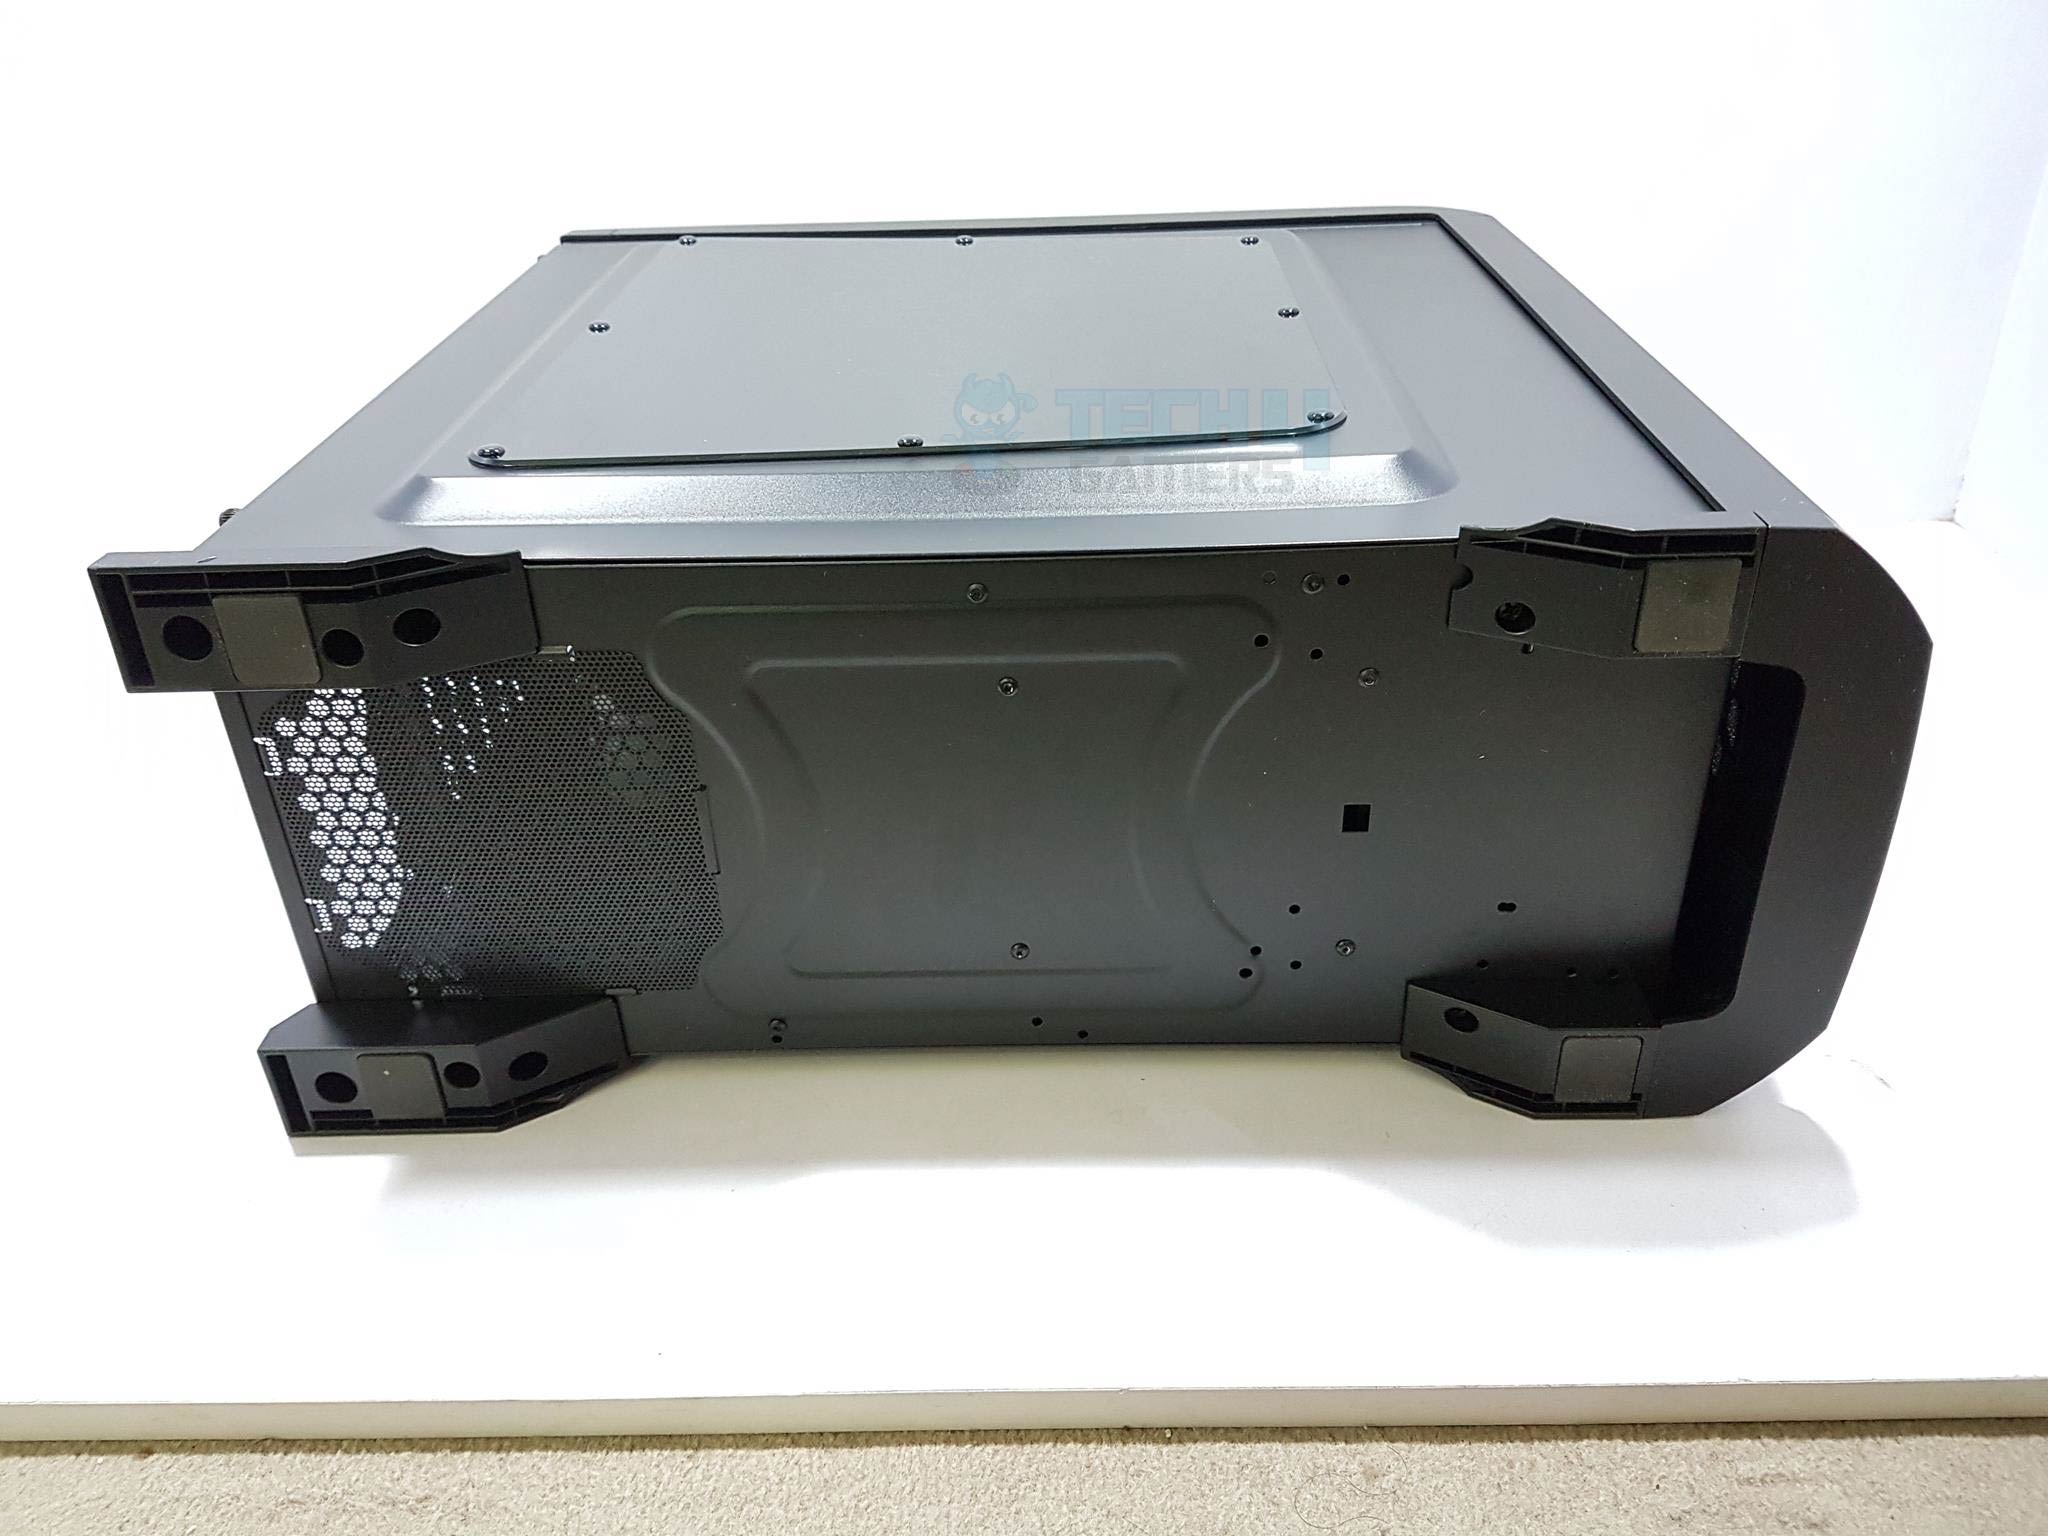 Antec GX330 Chassis Bottom Side Closer Look